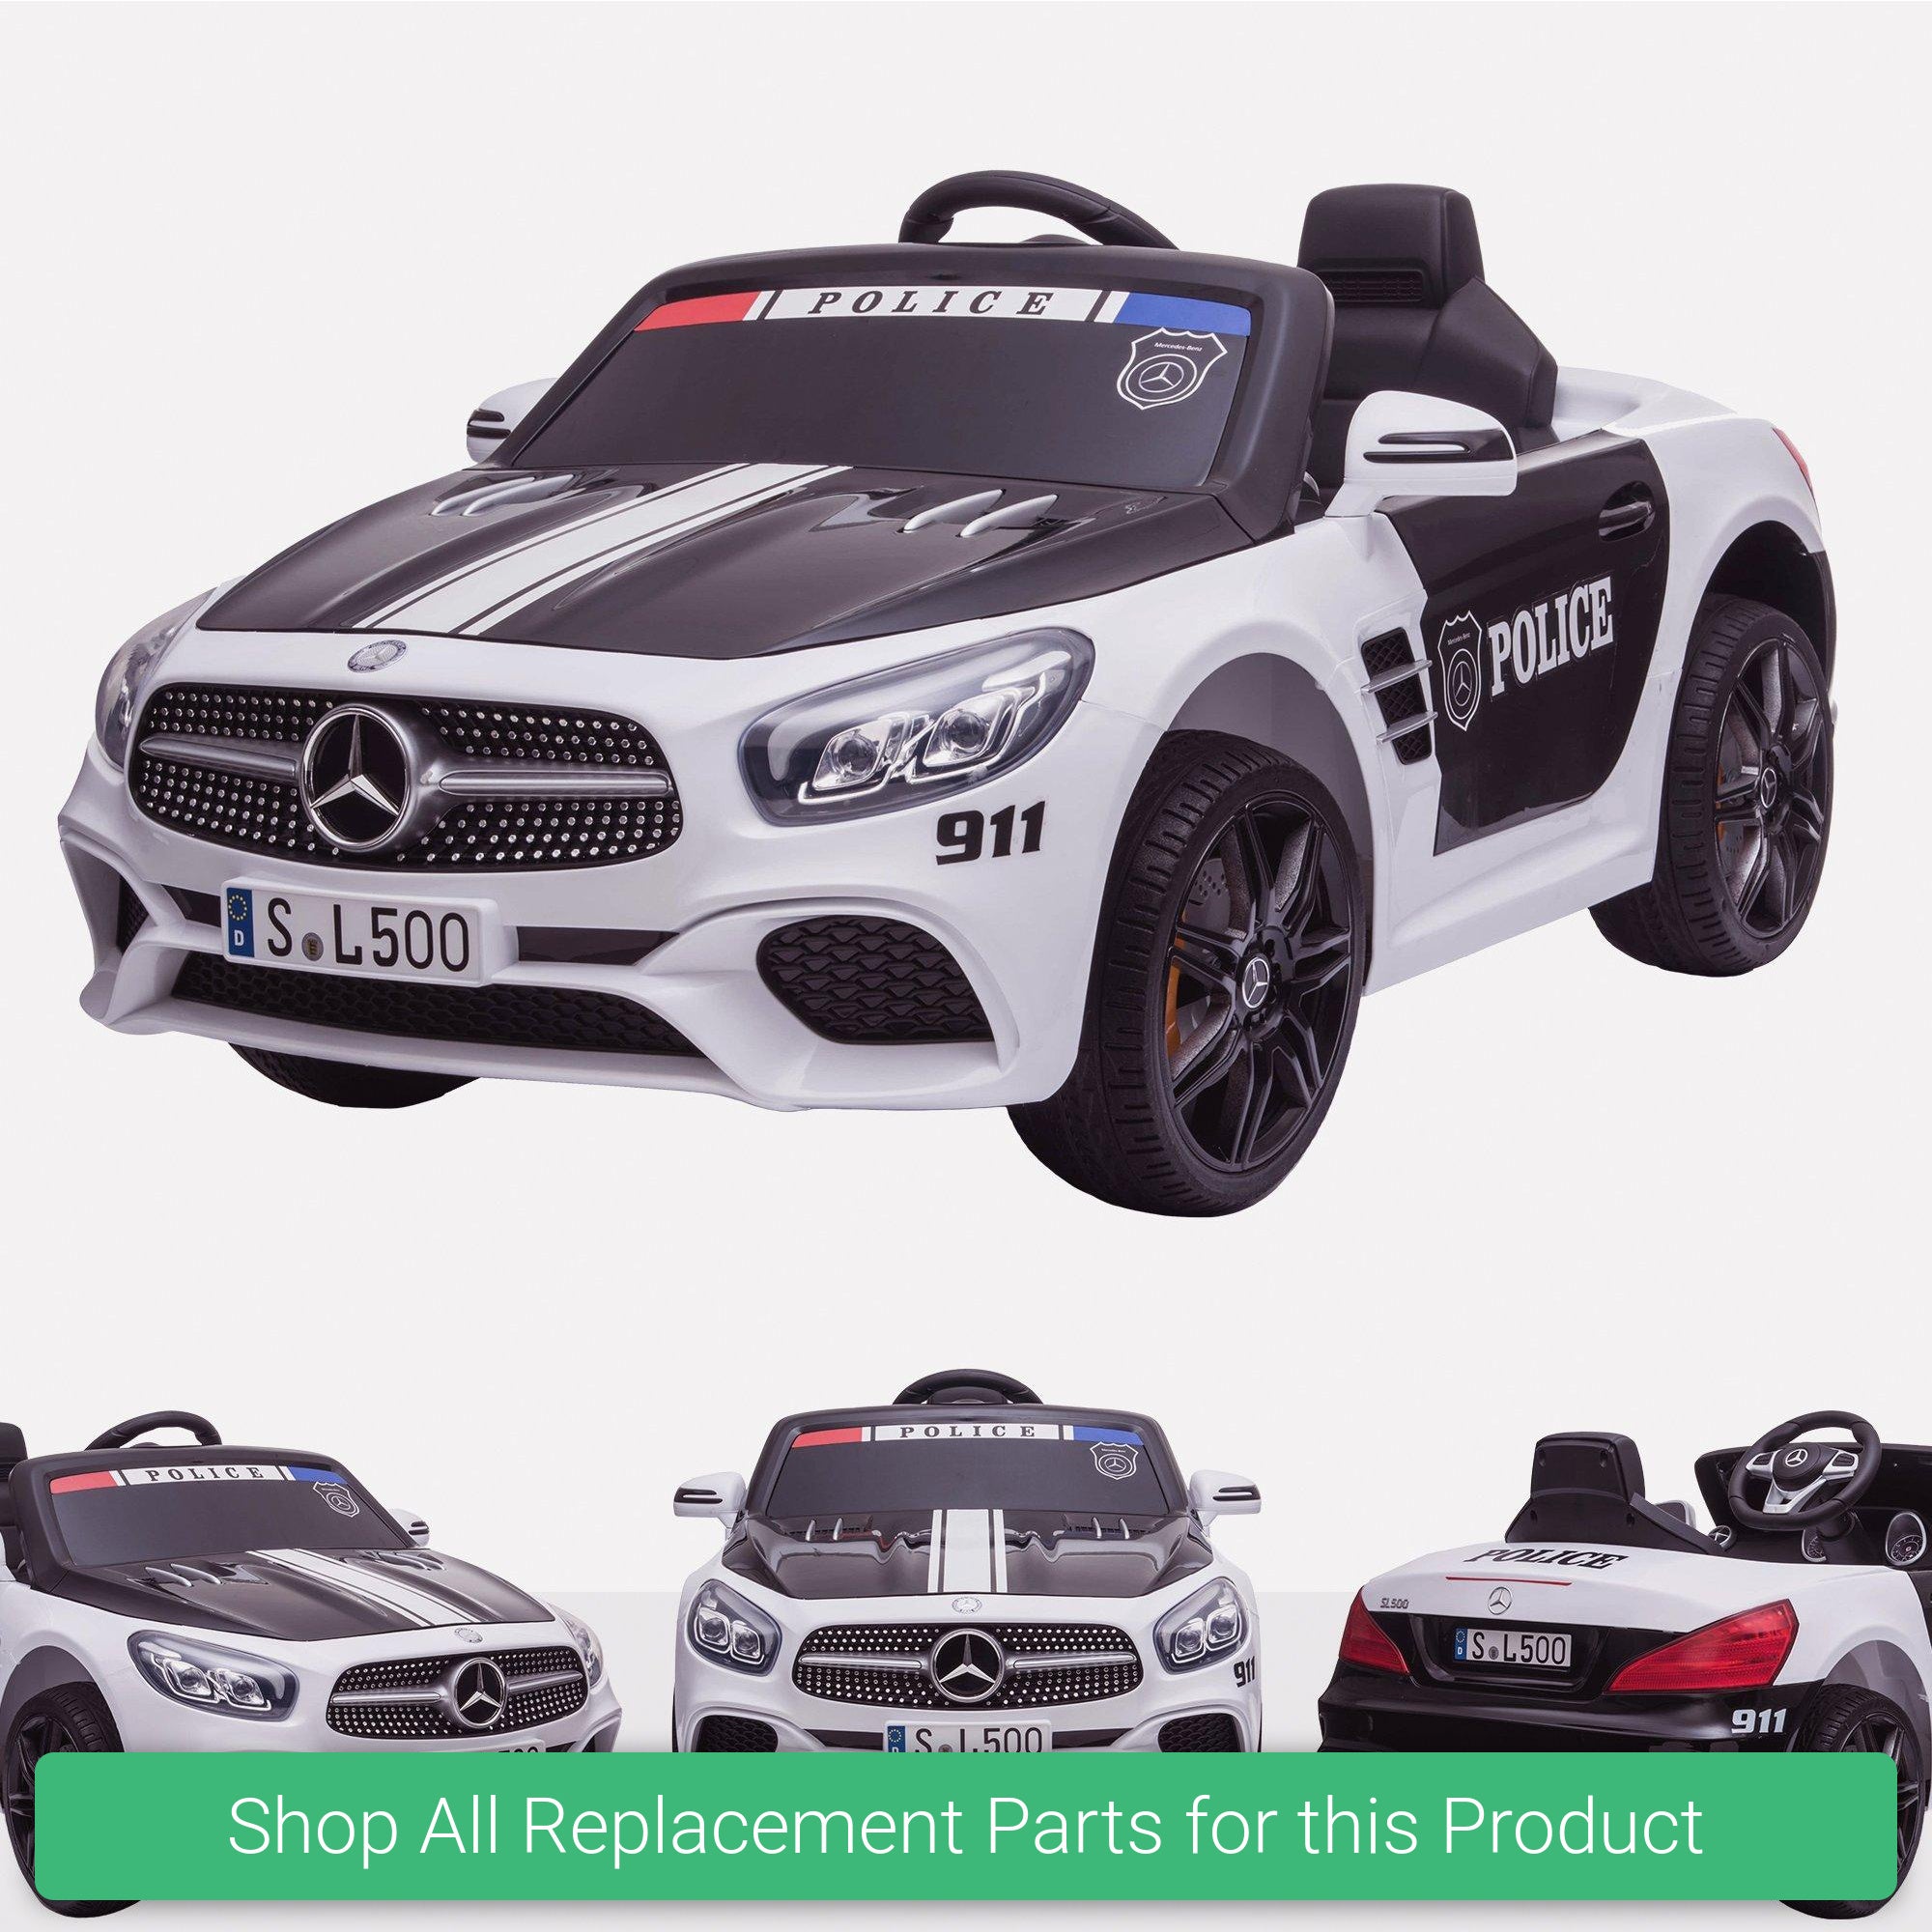 Replacement Parts and Spares for Kids Mercedes Licensed SL500 Police Edition - POL-SL500-VARI - S301